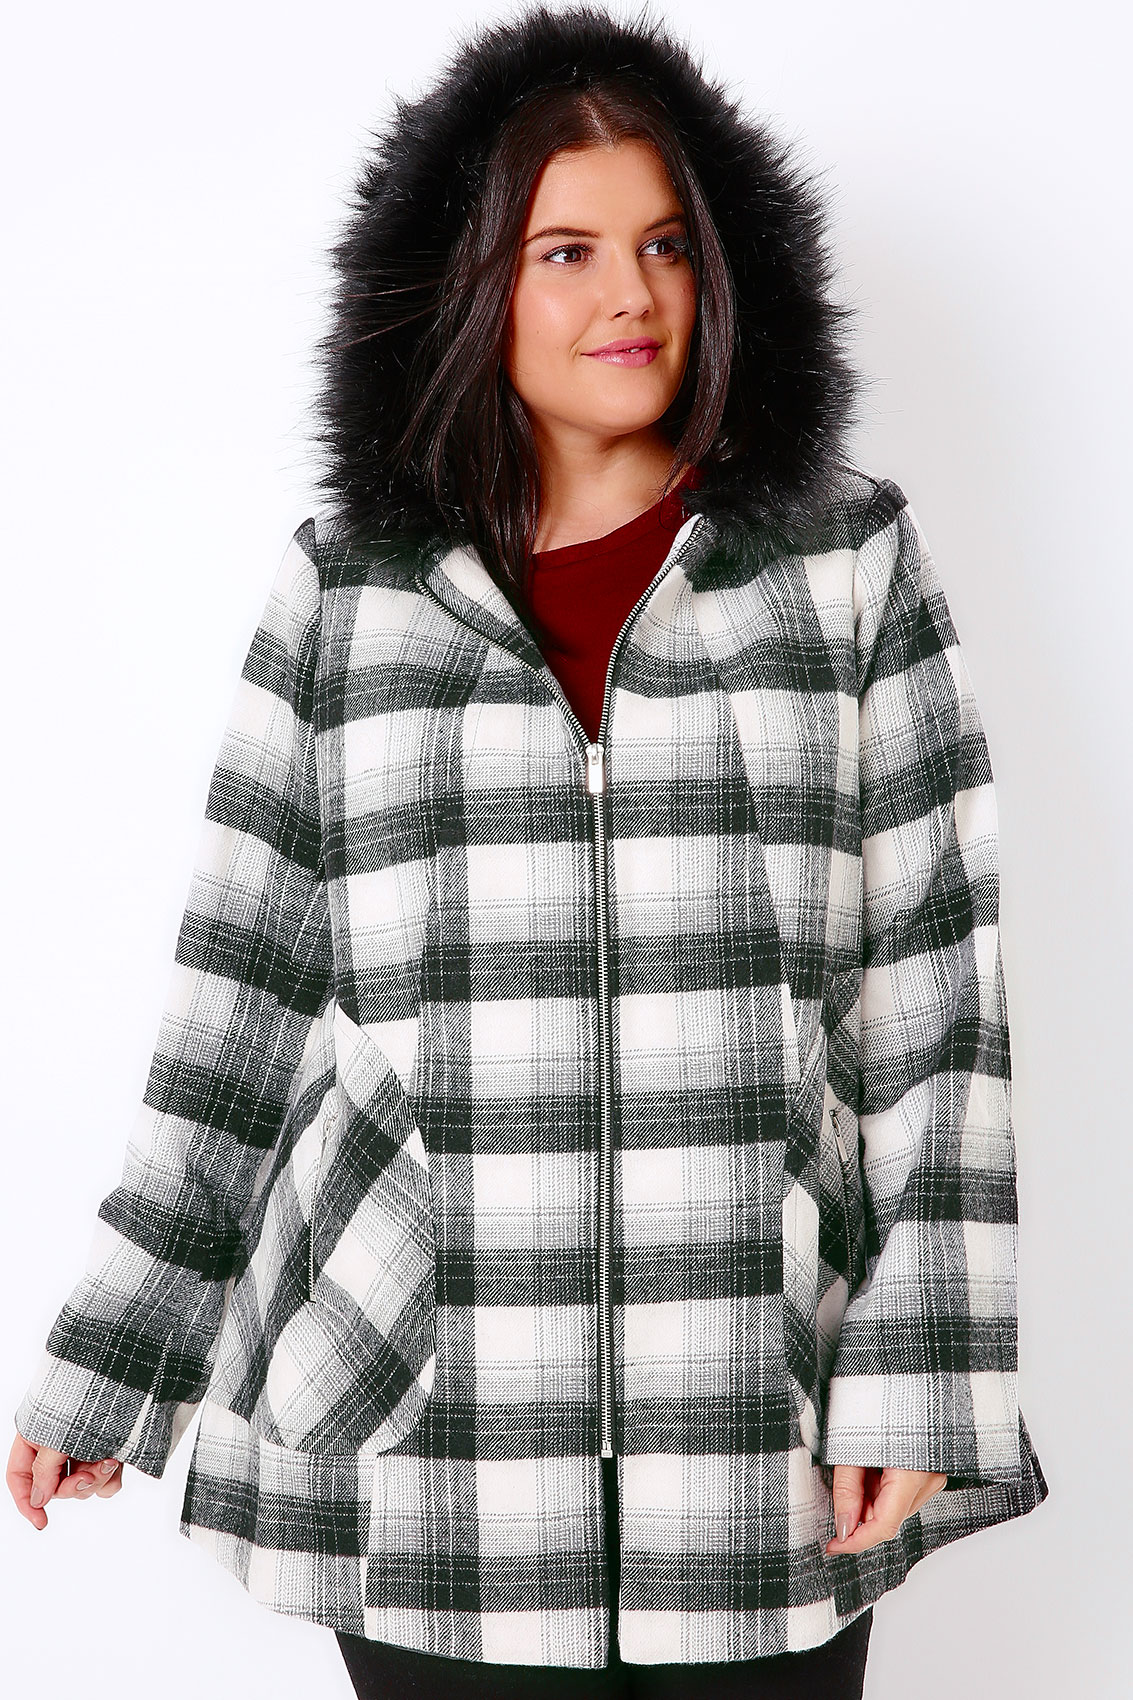 Black & White Check Swing Coat With Faux Fur Trim Hood, Plus Size 16 to 36